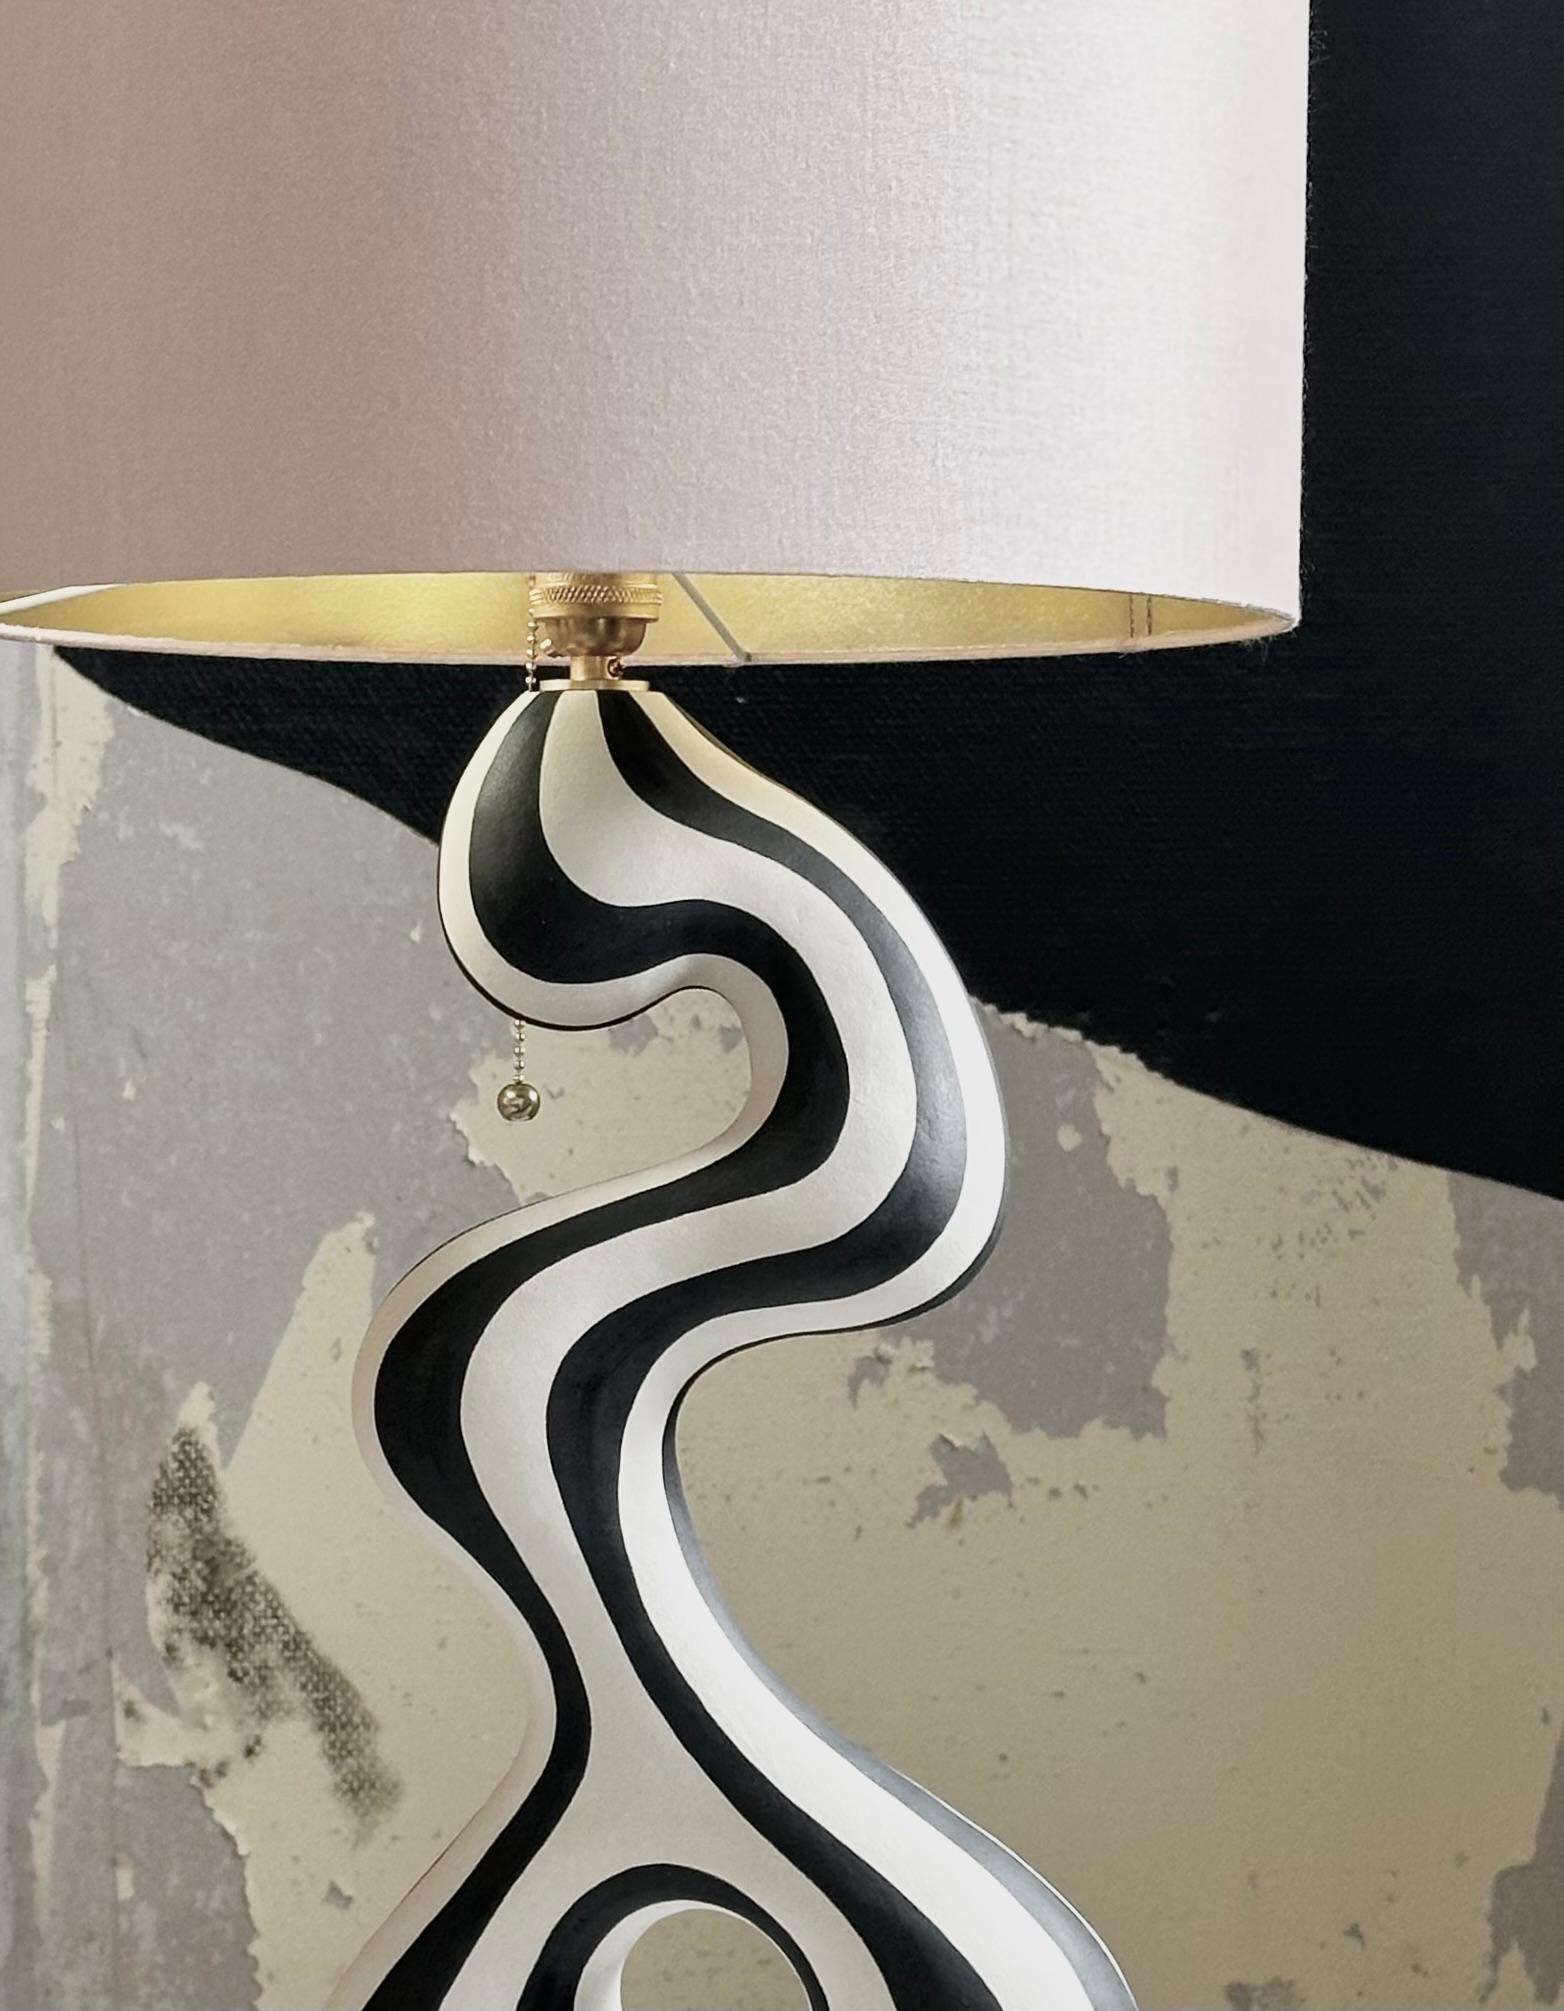 Crafted by hand: ceramic table lamp by Norwegian artist Jossolini For Sale 2